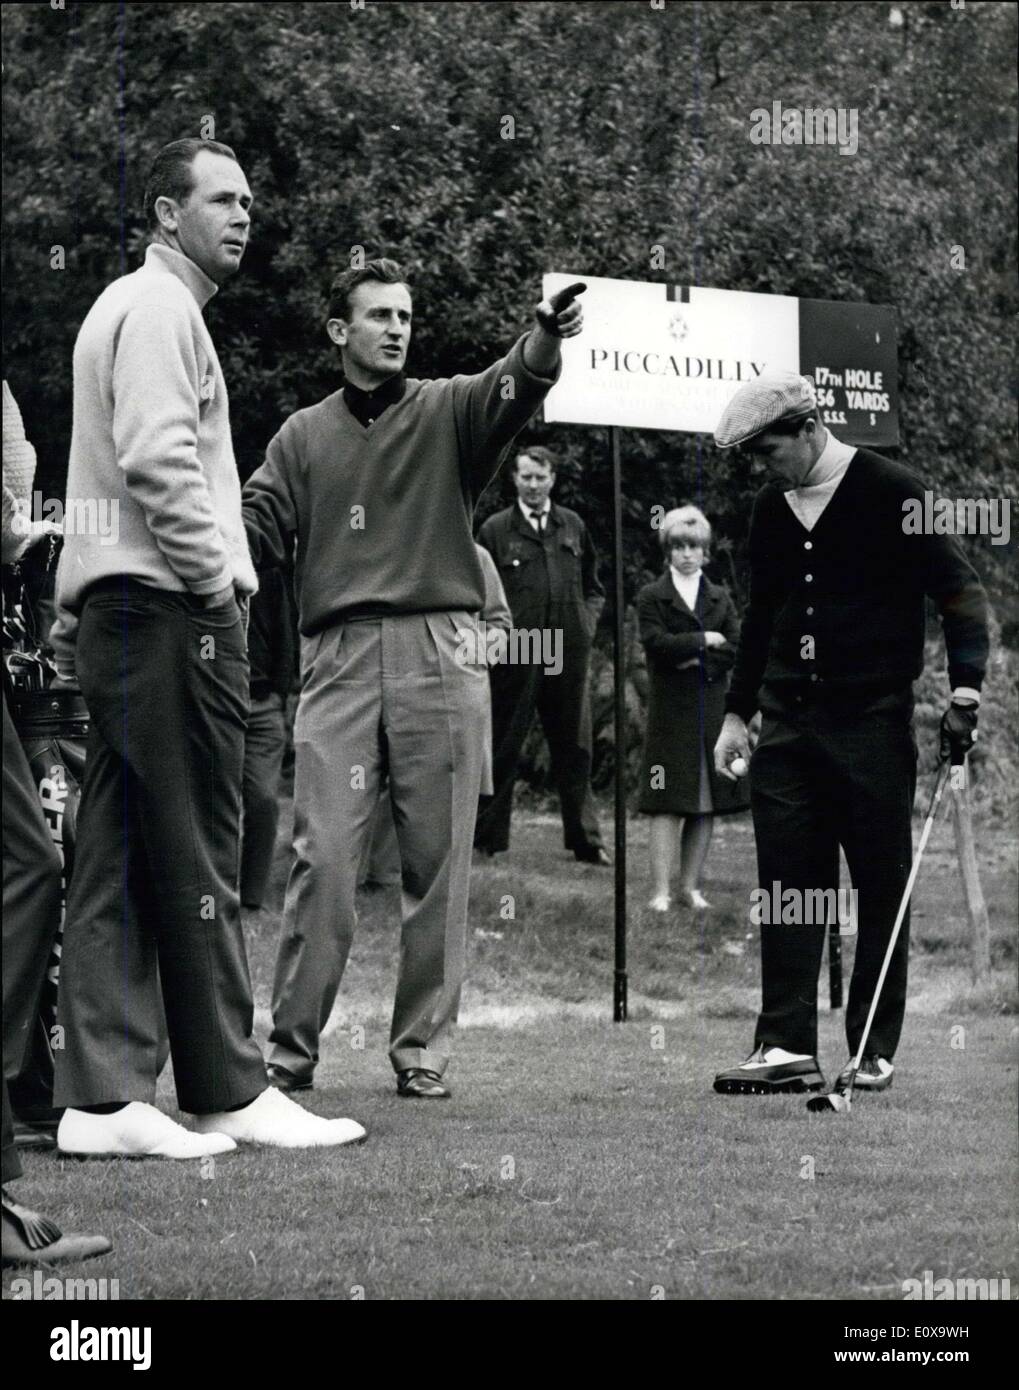 Oct. 13, 1965 - Ted Dexter Says Gary Player Is The Greatest: Ted Dexter, golfing chum of Gary Player during England's last cricket tour of Australia, met him again yesterday at Wentworth. And after three spell-binding hours on the Burma Road, Ted rated the little South African a certainty to win the Piccadilly world match play championship which begins there tomorrow. Gary has never hit the ball better, said Dexter Stock Photo